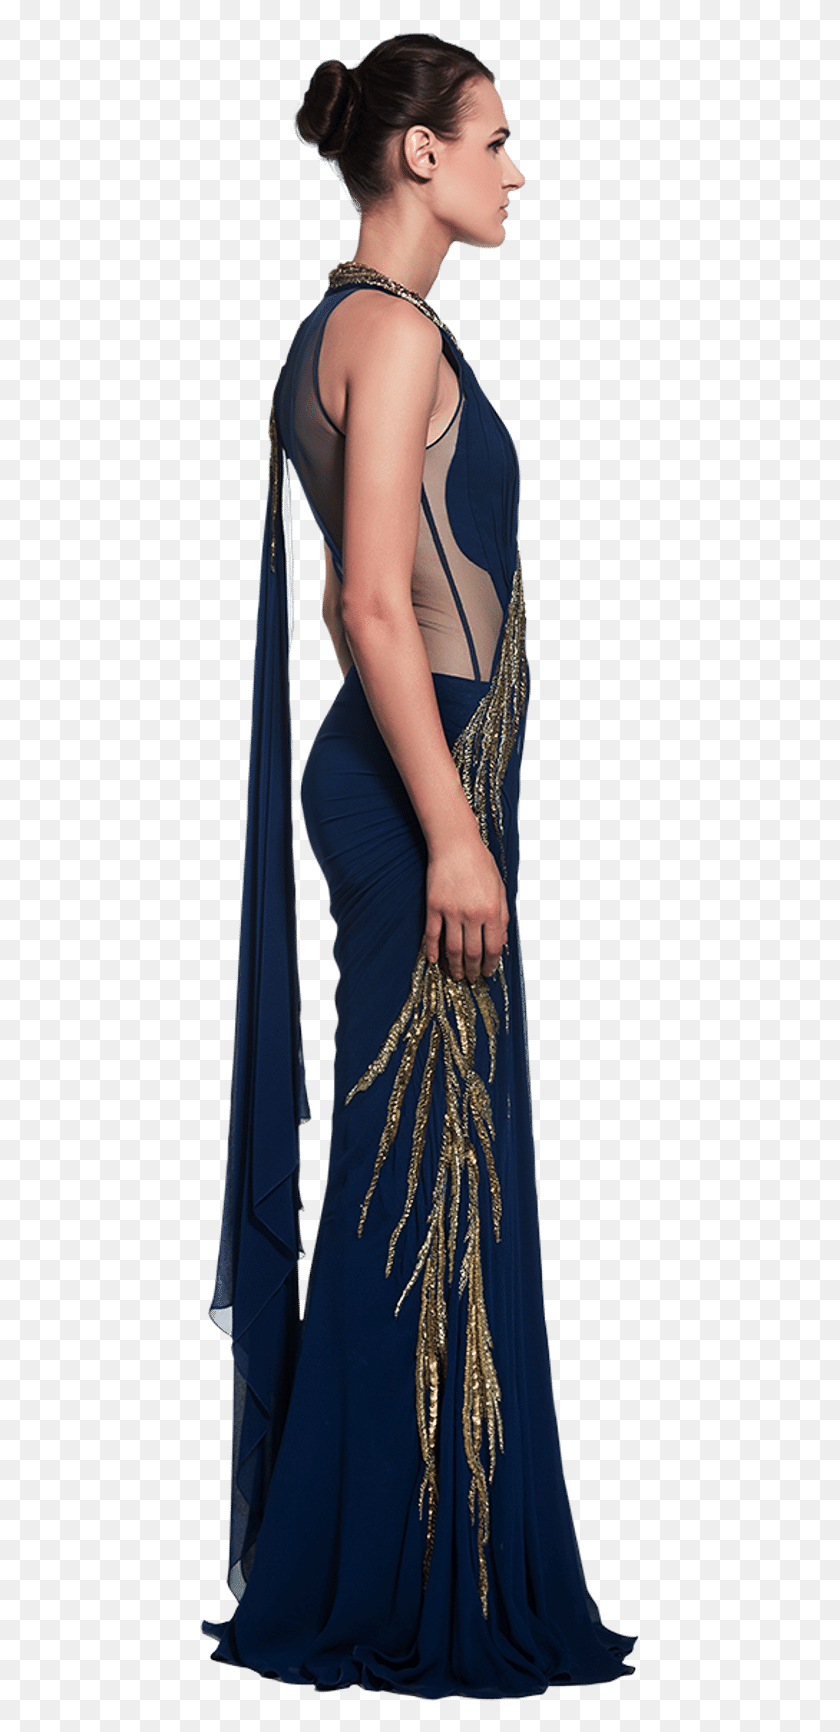 441x1672 Deep Blue Saree Gown With Gold Embellishments Photo Shoot, Clothing, Apparel, Evening Dress Descargar Hd Png